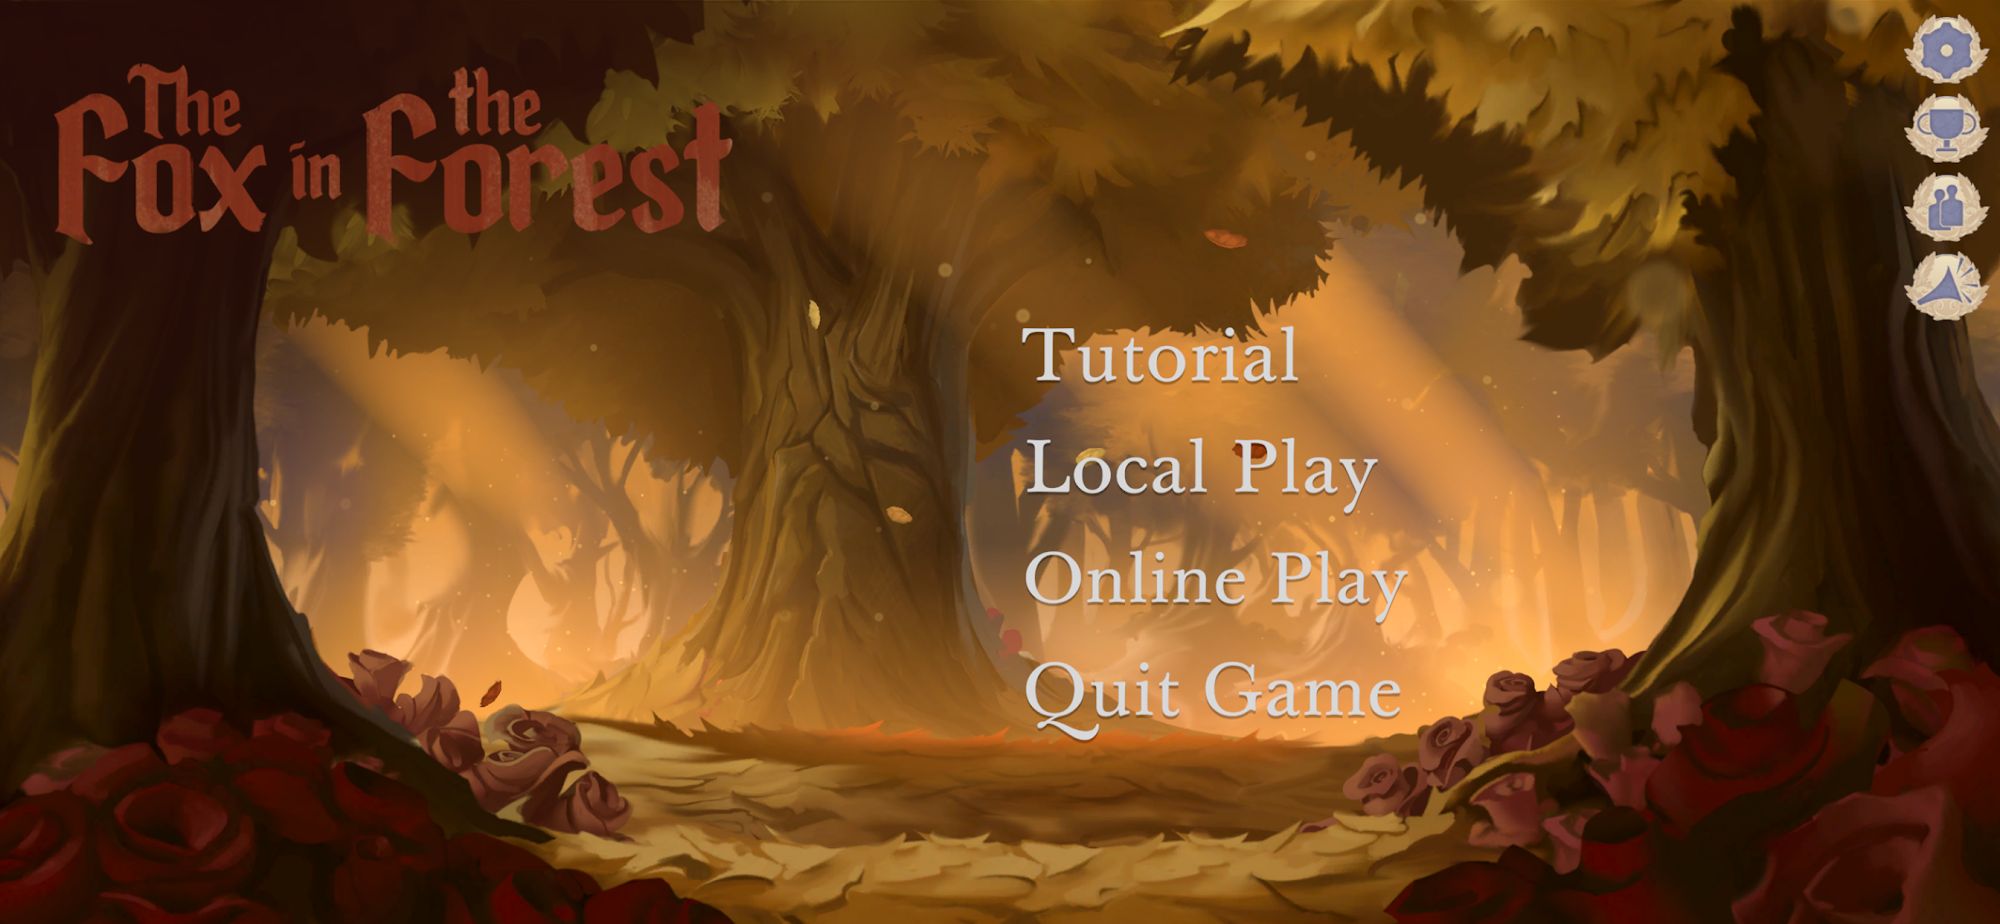 Baixar The Fox in the Forest para Android grátis.